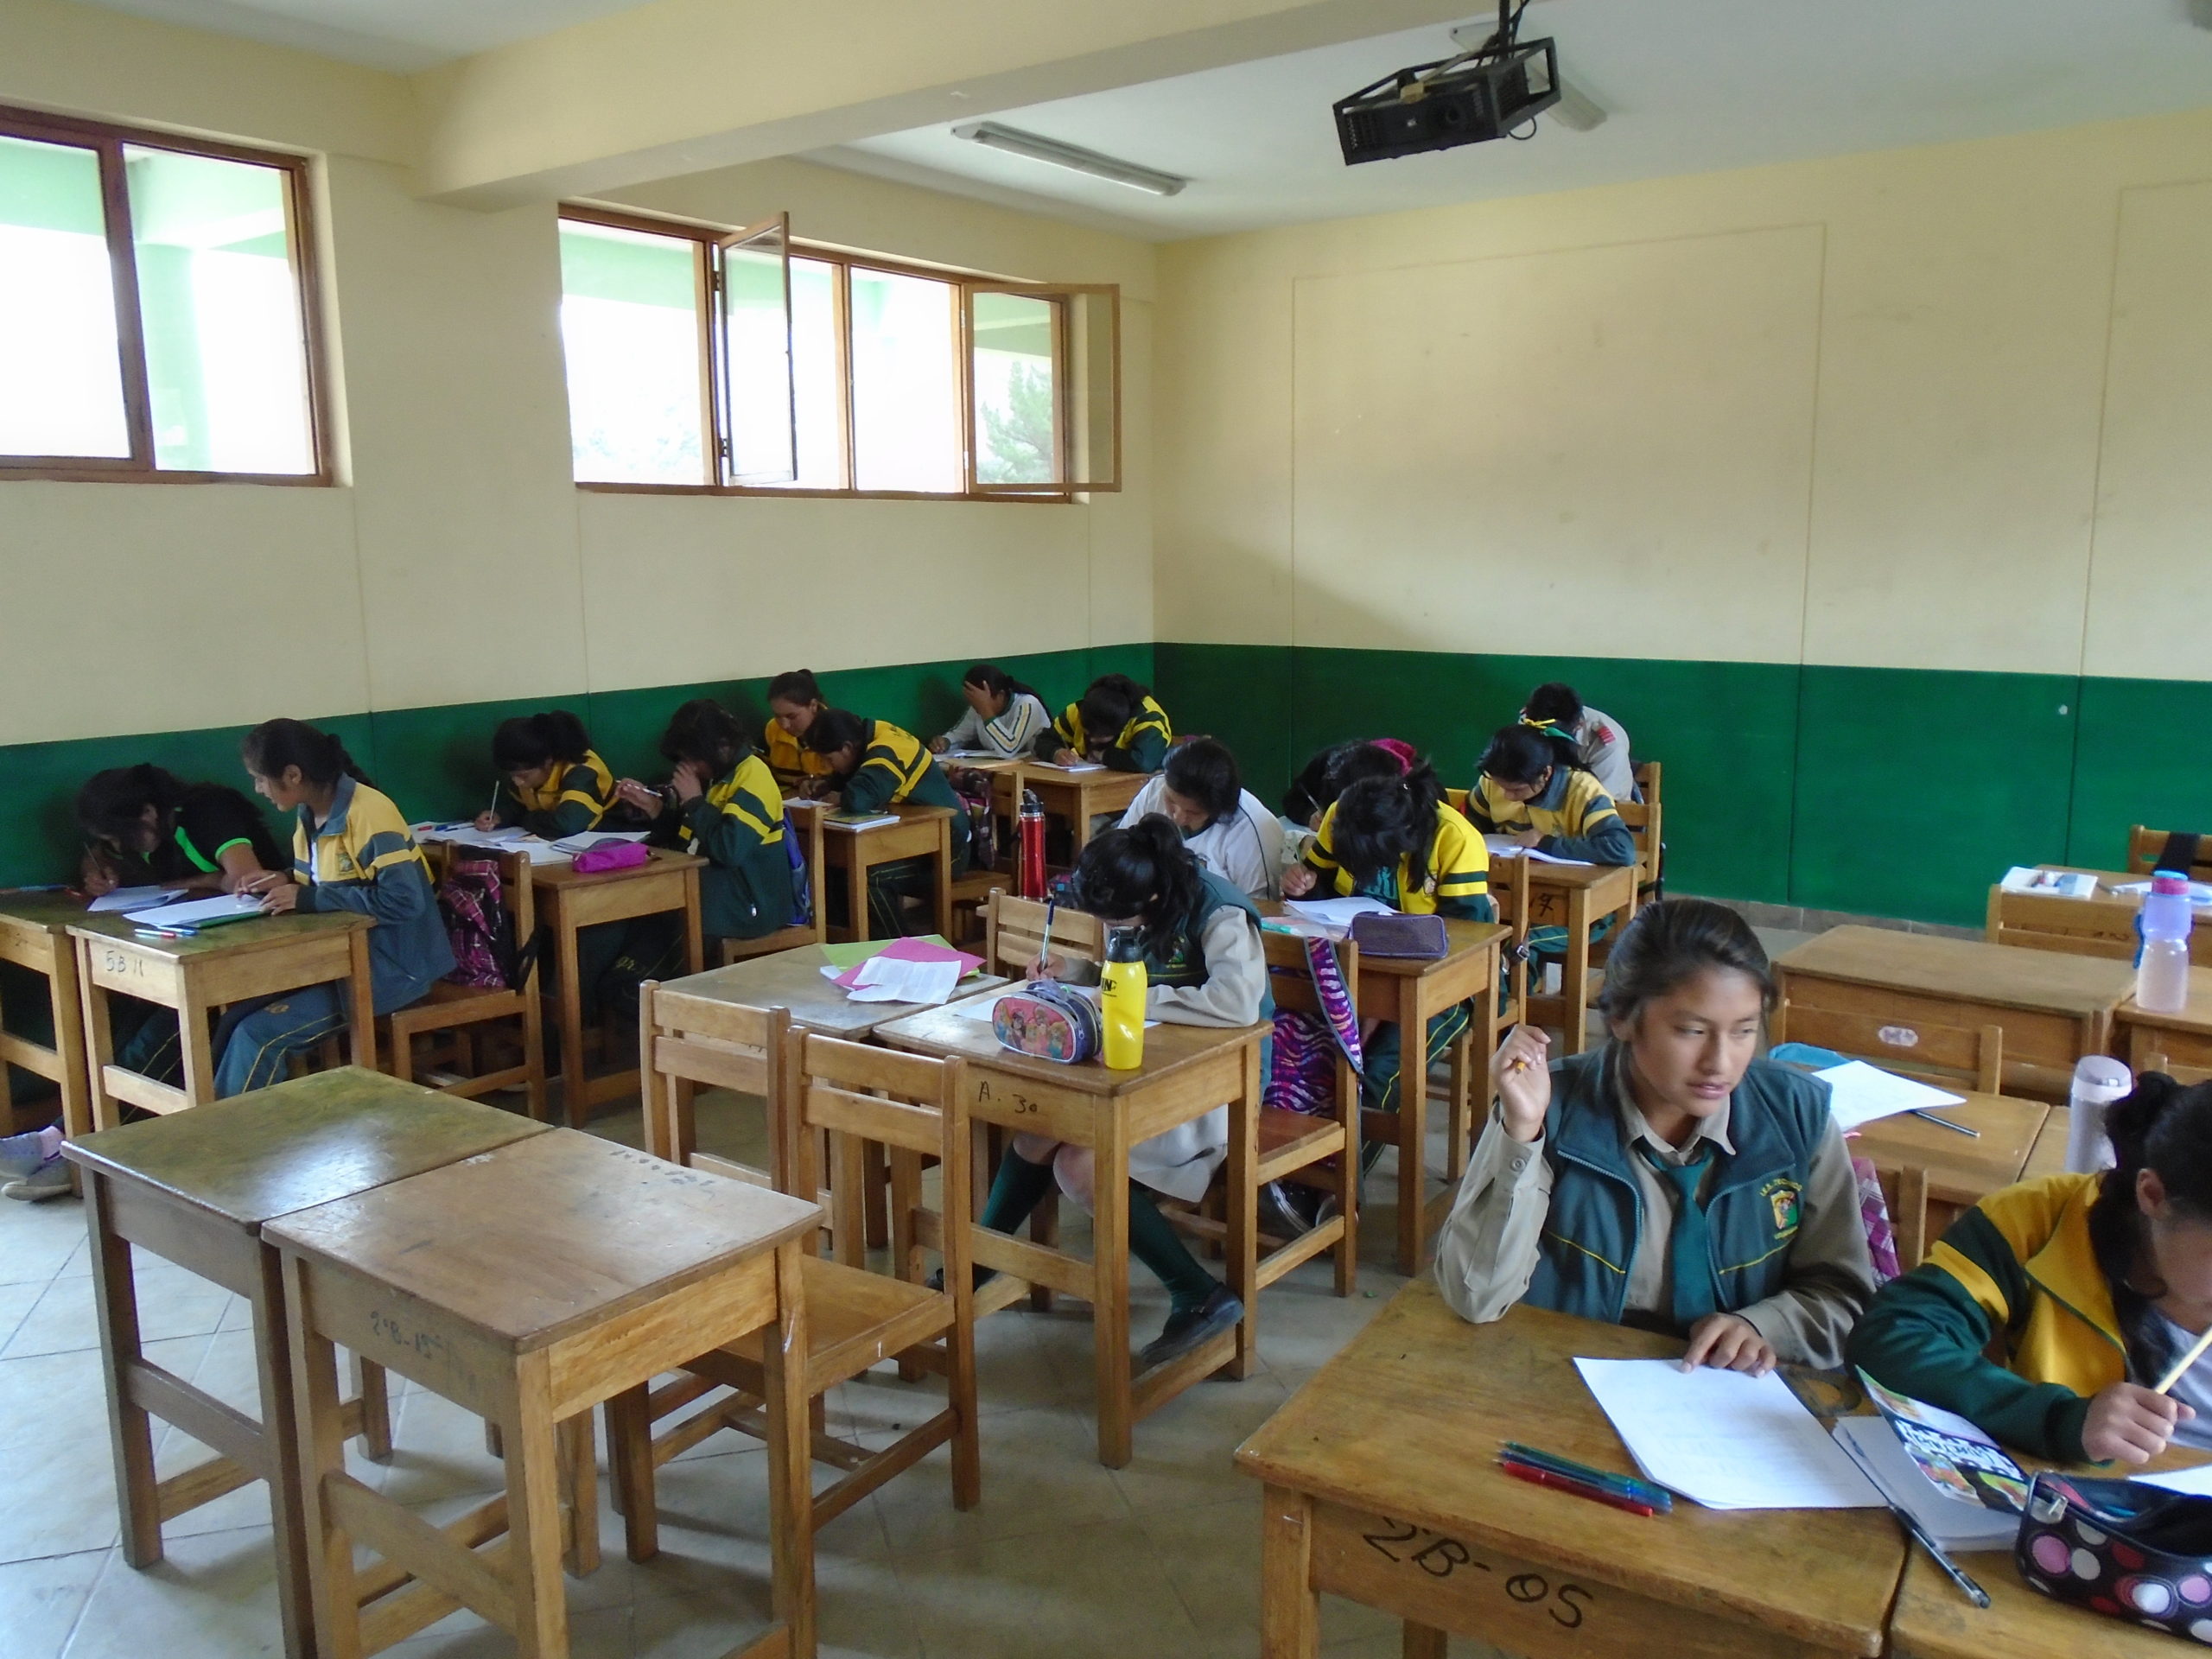 Picture of Peruvian students in a classroom with bare walls and wood desks.